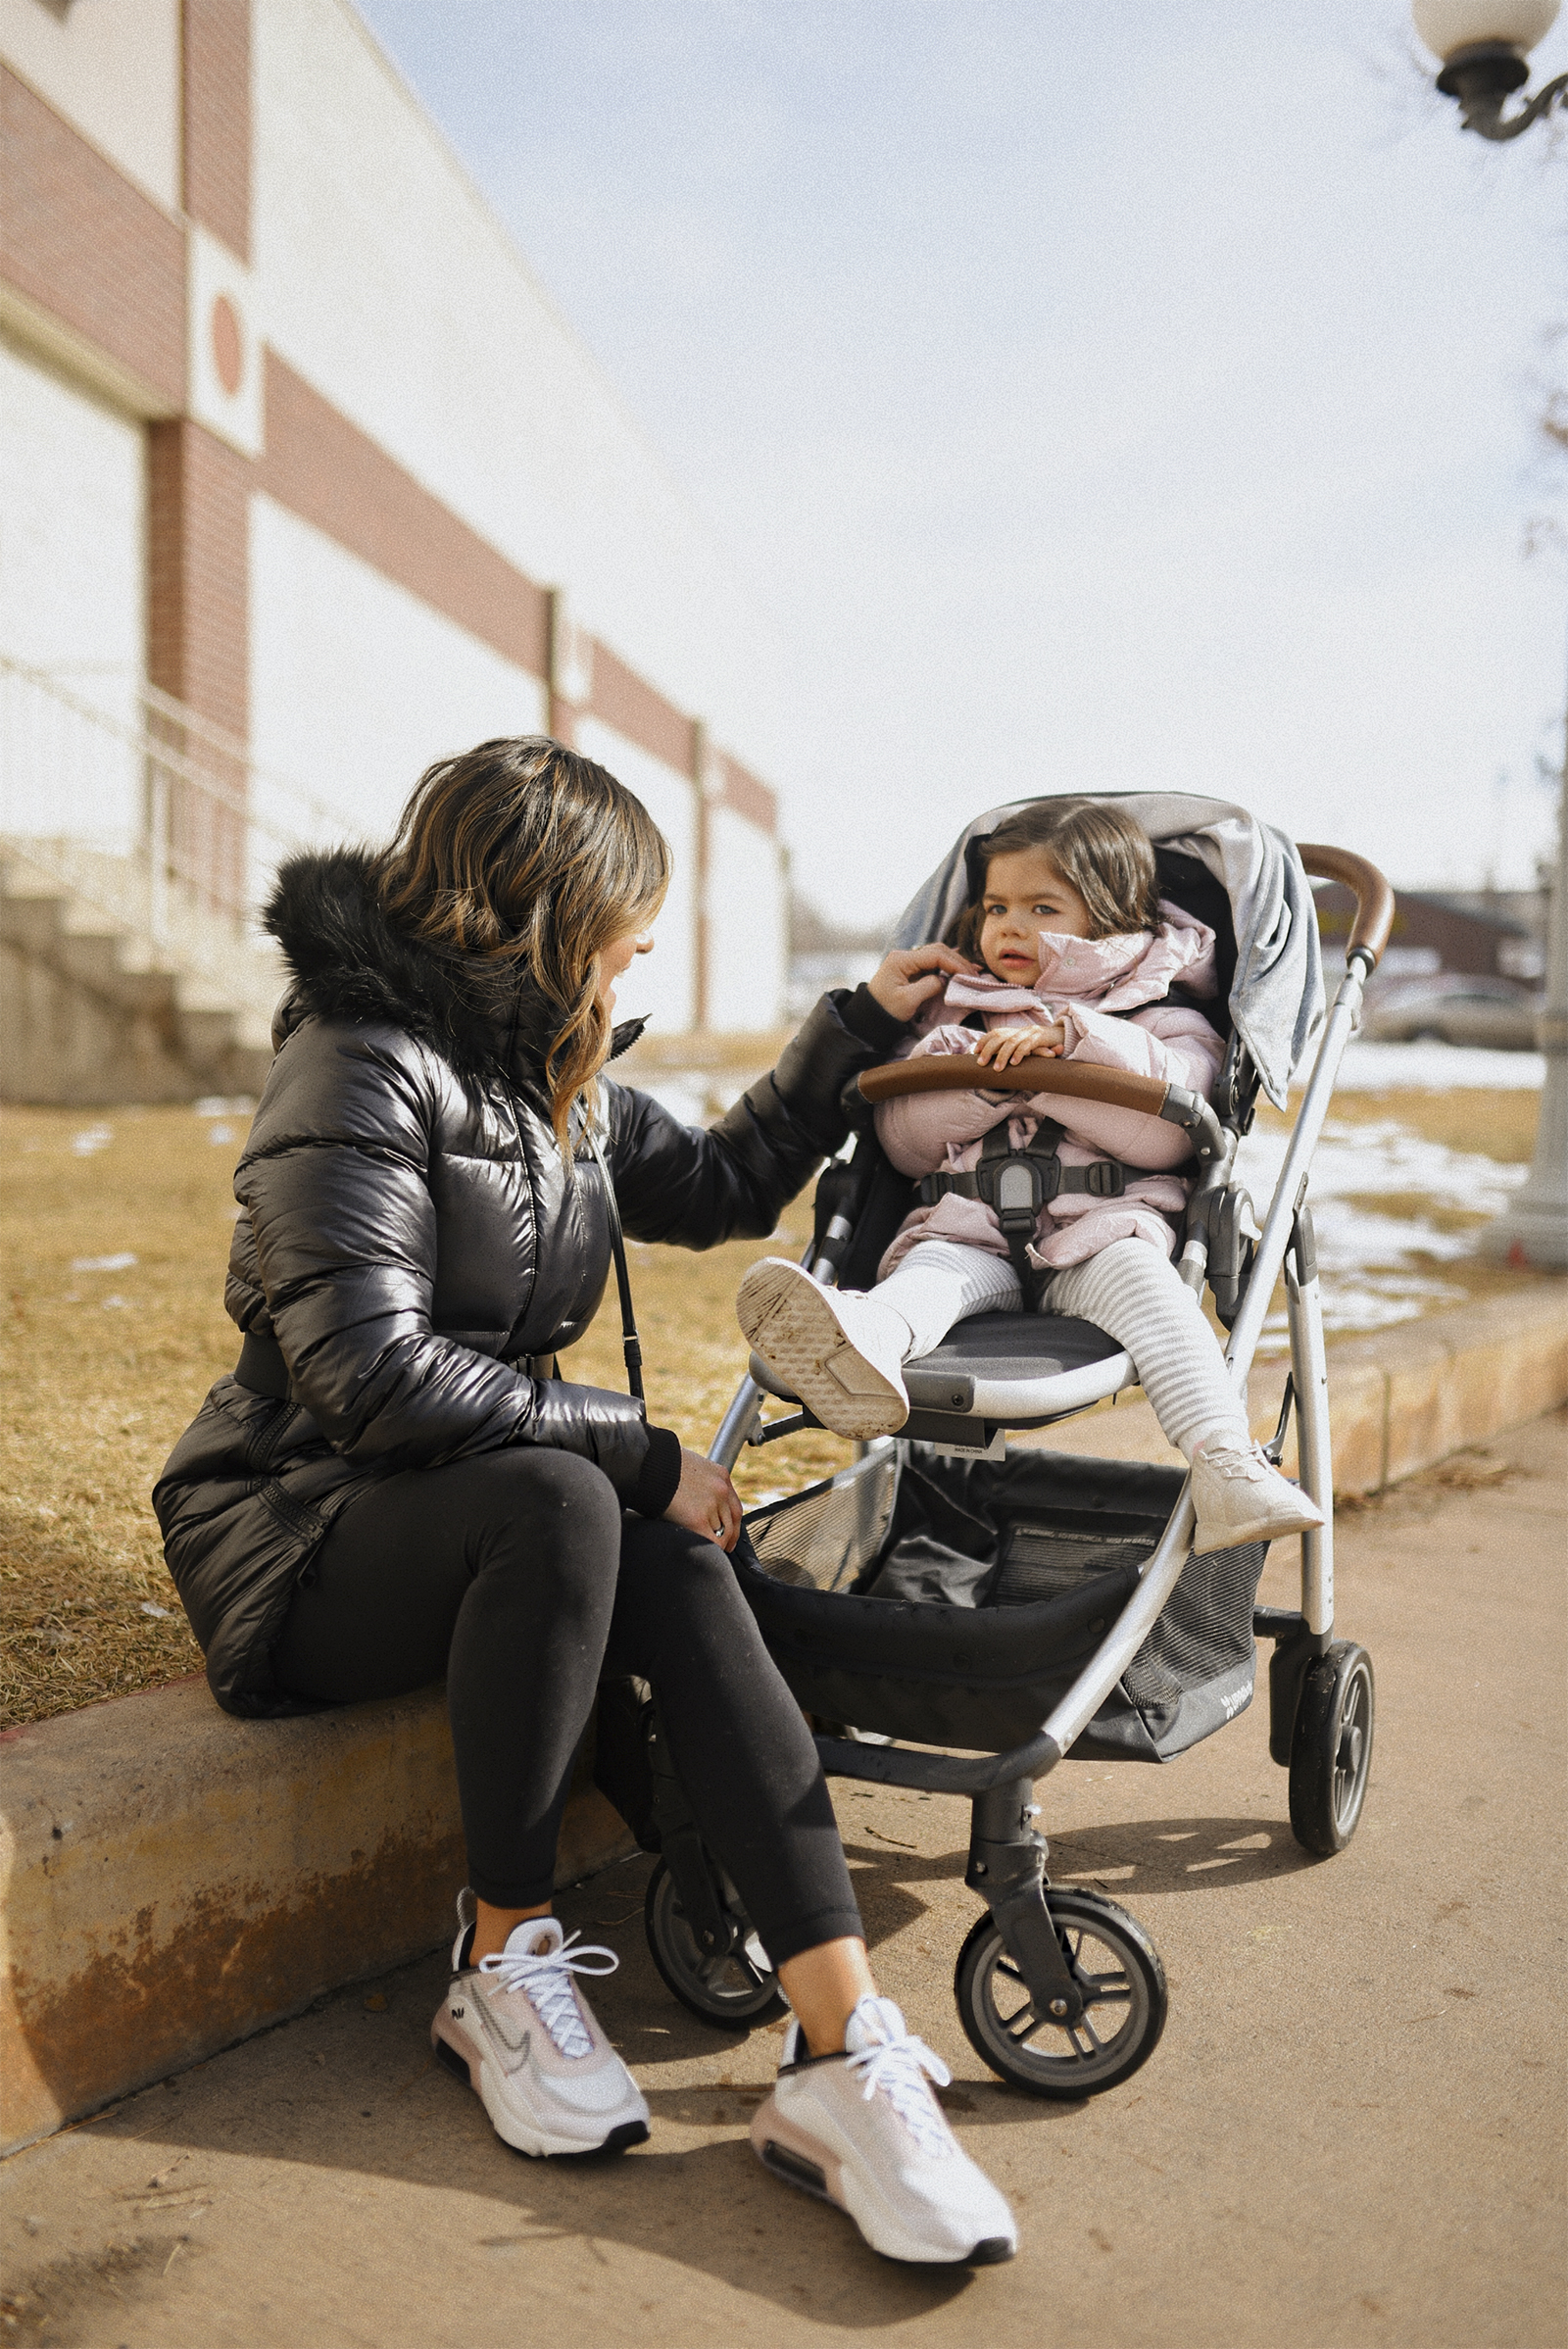 Carolina Hellal of Chic Talk wearing a The North Face back parka, Lulumeno black leggins, Nike Air Max 2090. Her daughter is in the Uppa Baby Cruz stroller.